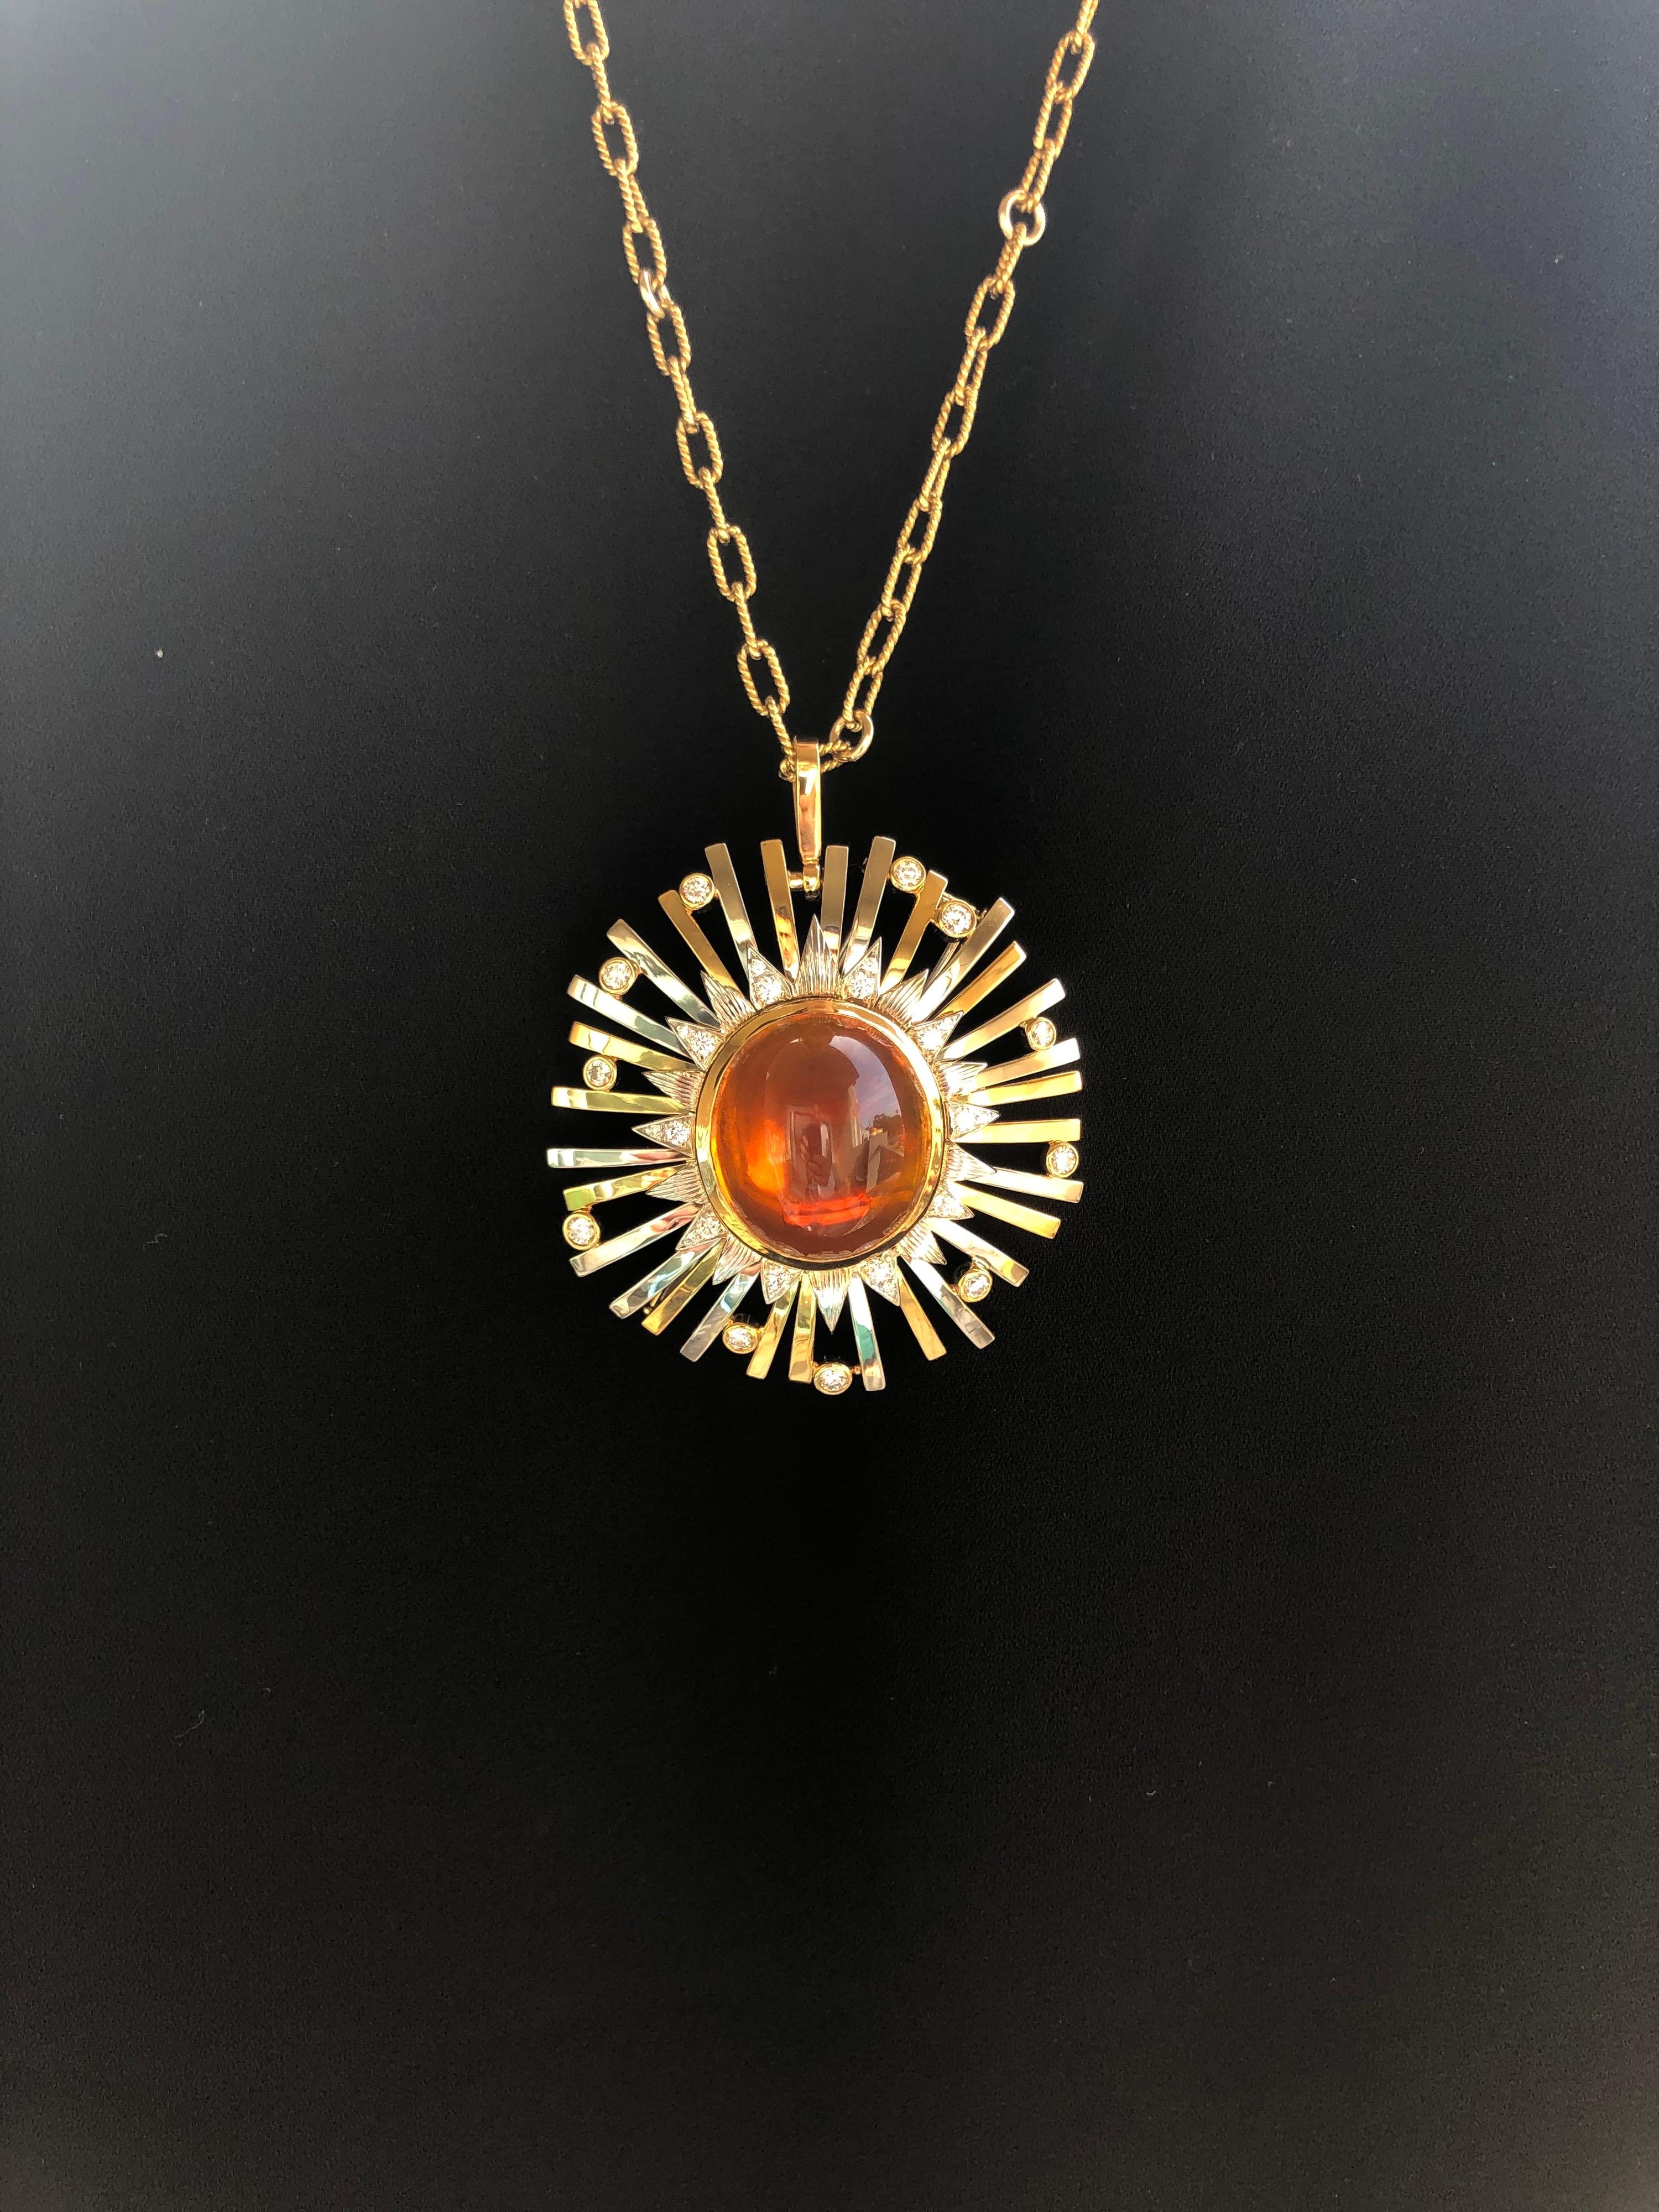 Madeira Citrine Pendant Necklace Brooch Cabochon 24.14 Carat  For Sale 1